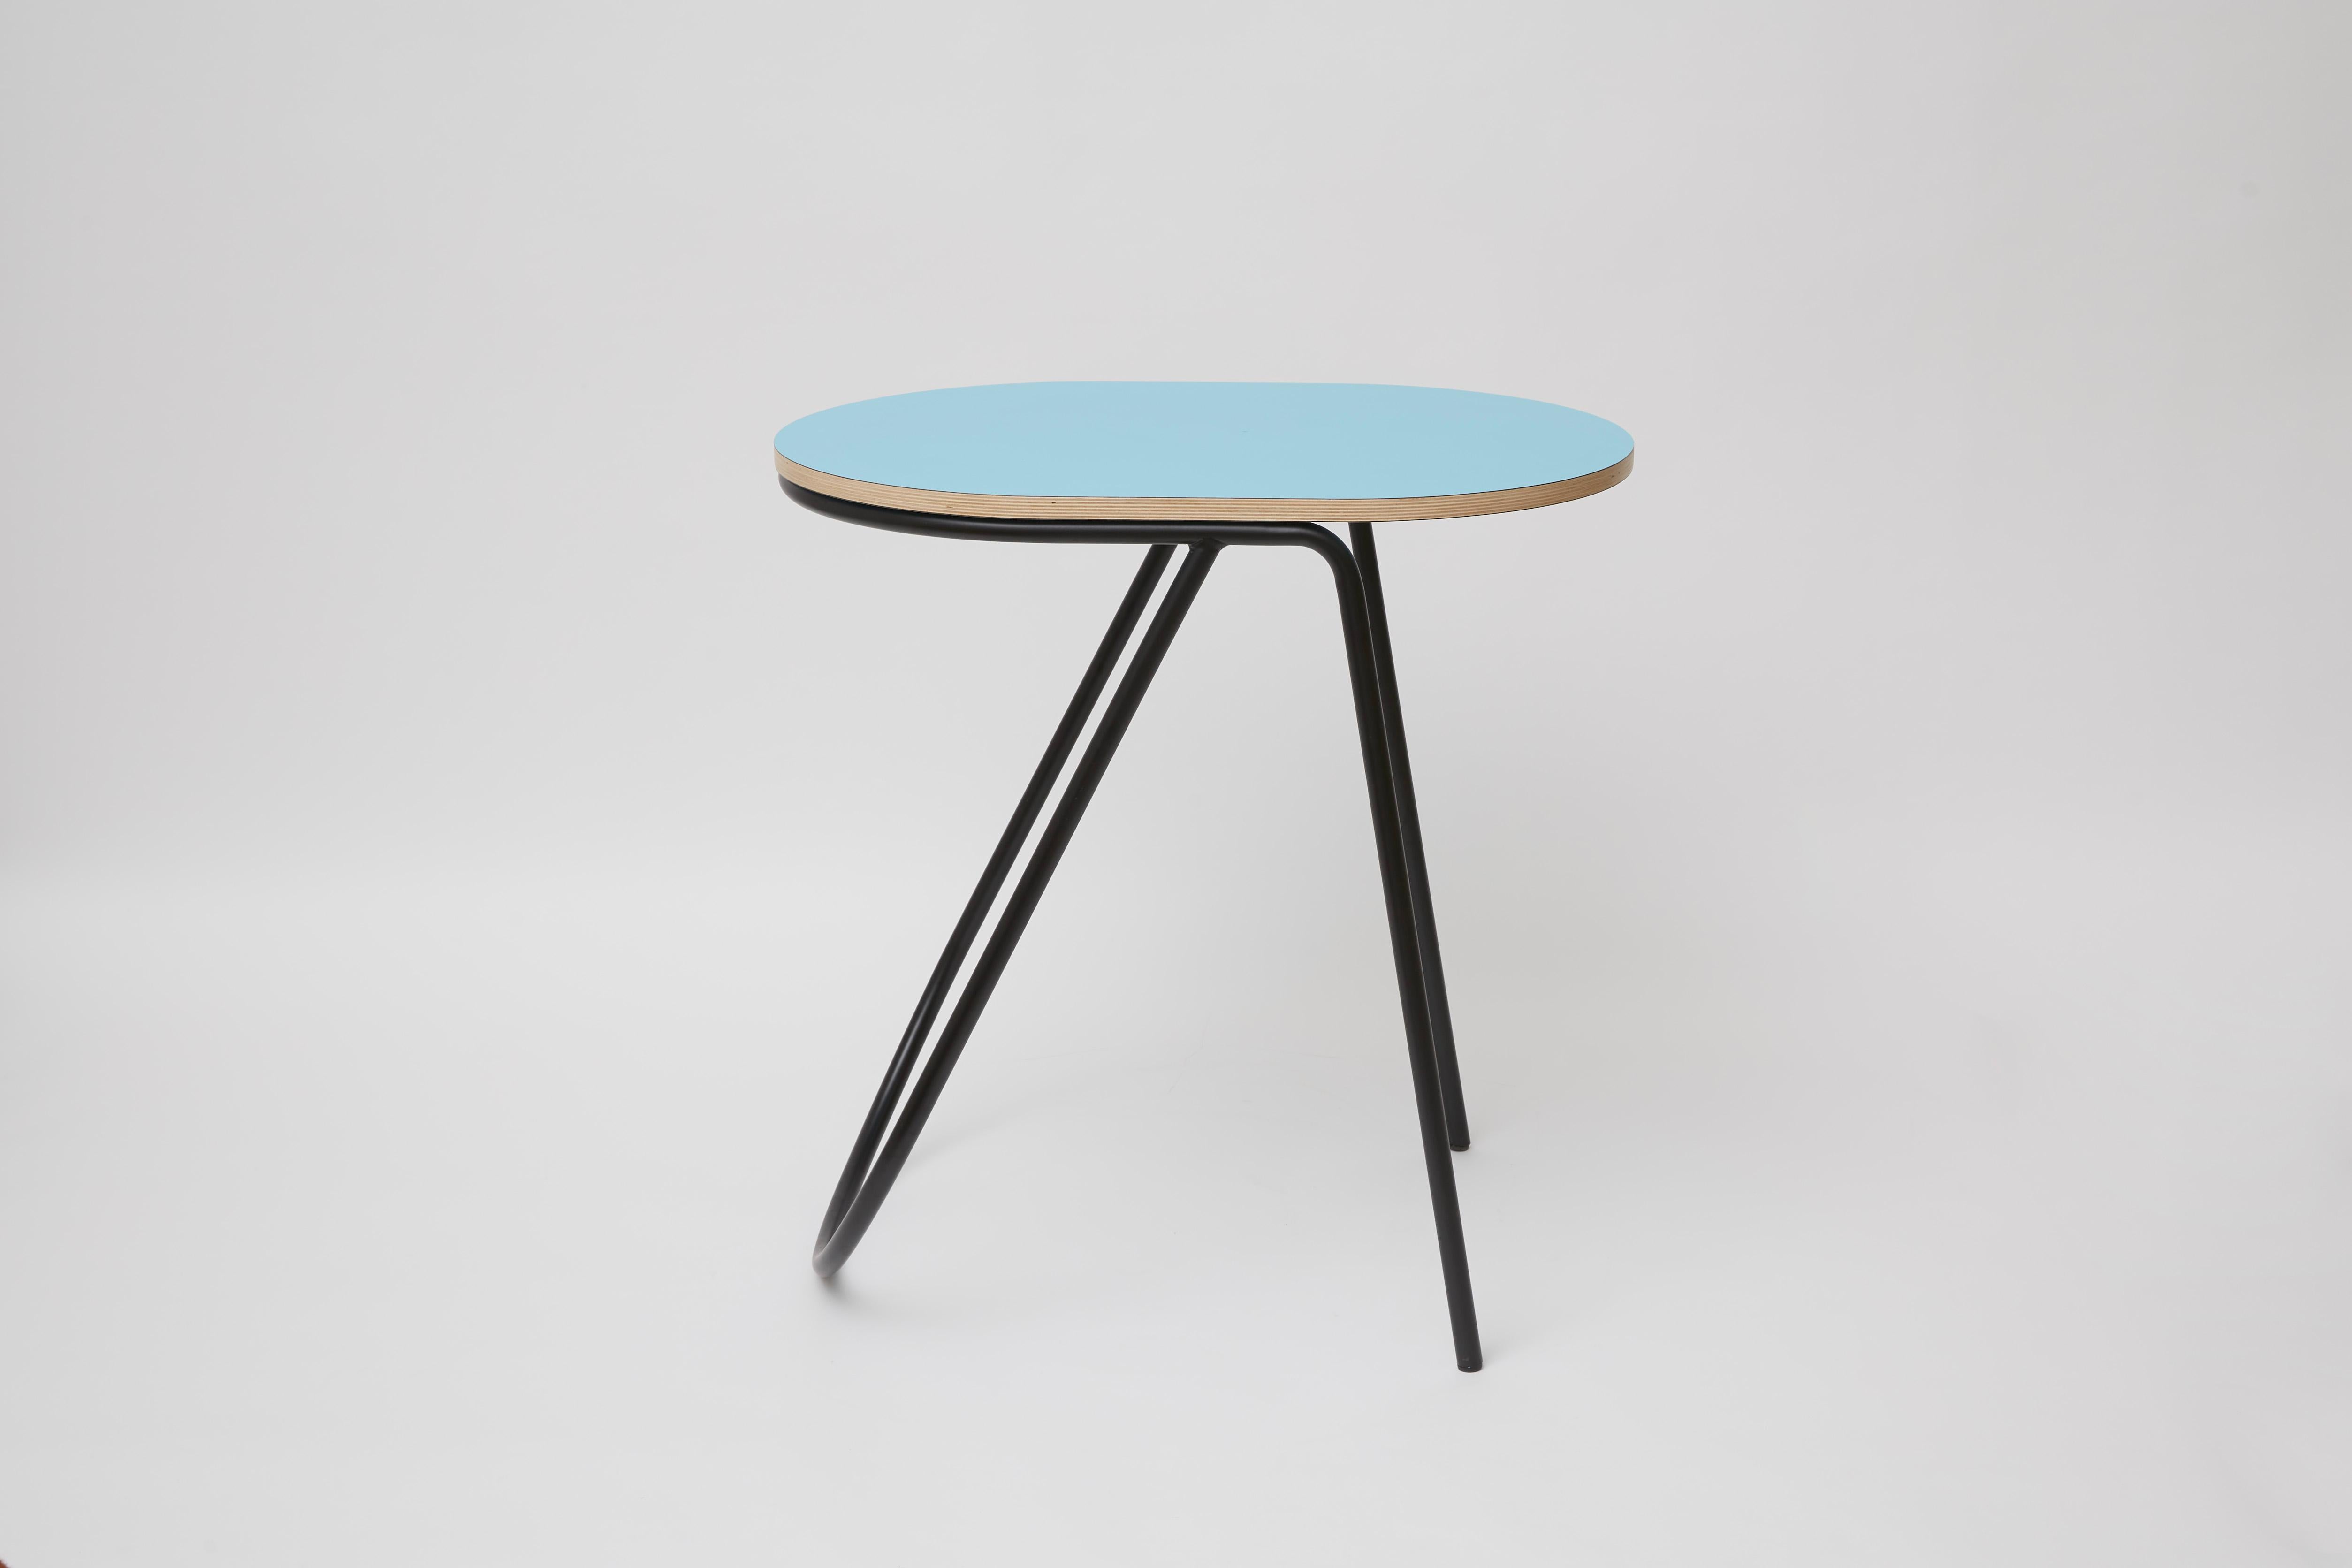 A quiet asymmetrical twist distinguishes this round side table from the La Misciù Collection. The wooden top finished in light-blue rests on an airy cylindrical steel base comprised of two front legs and of a U-shaped element offering efficient rear